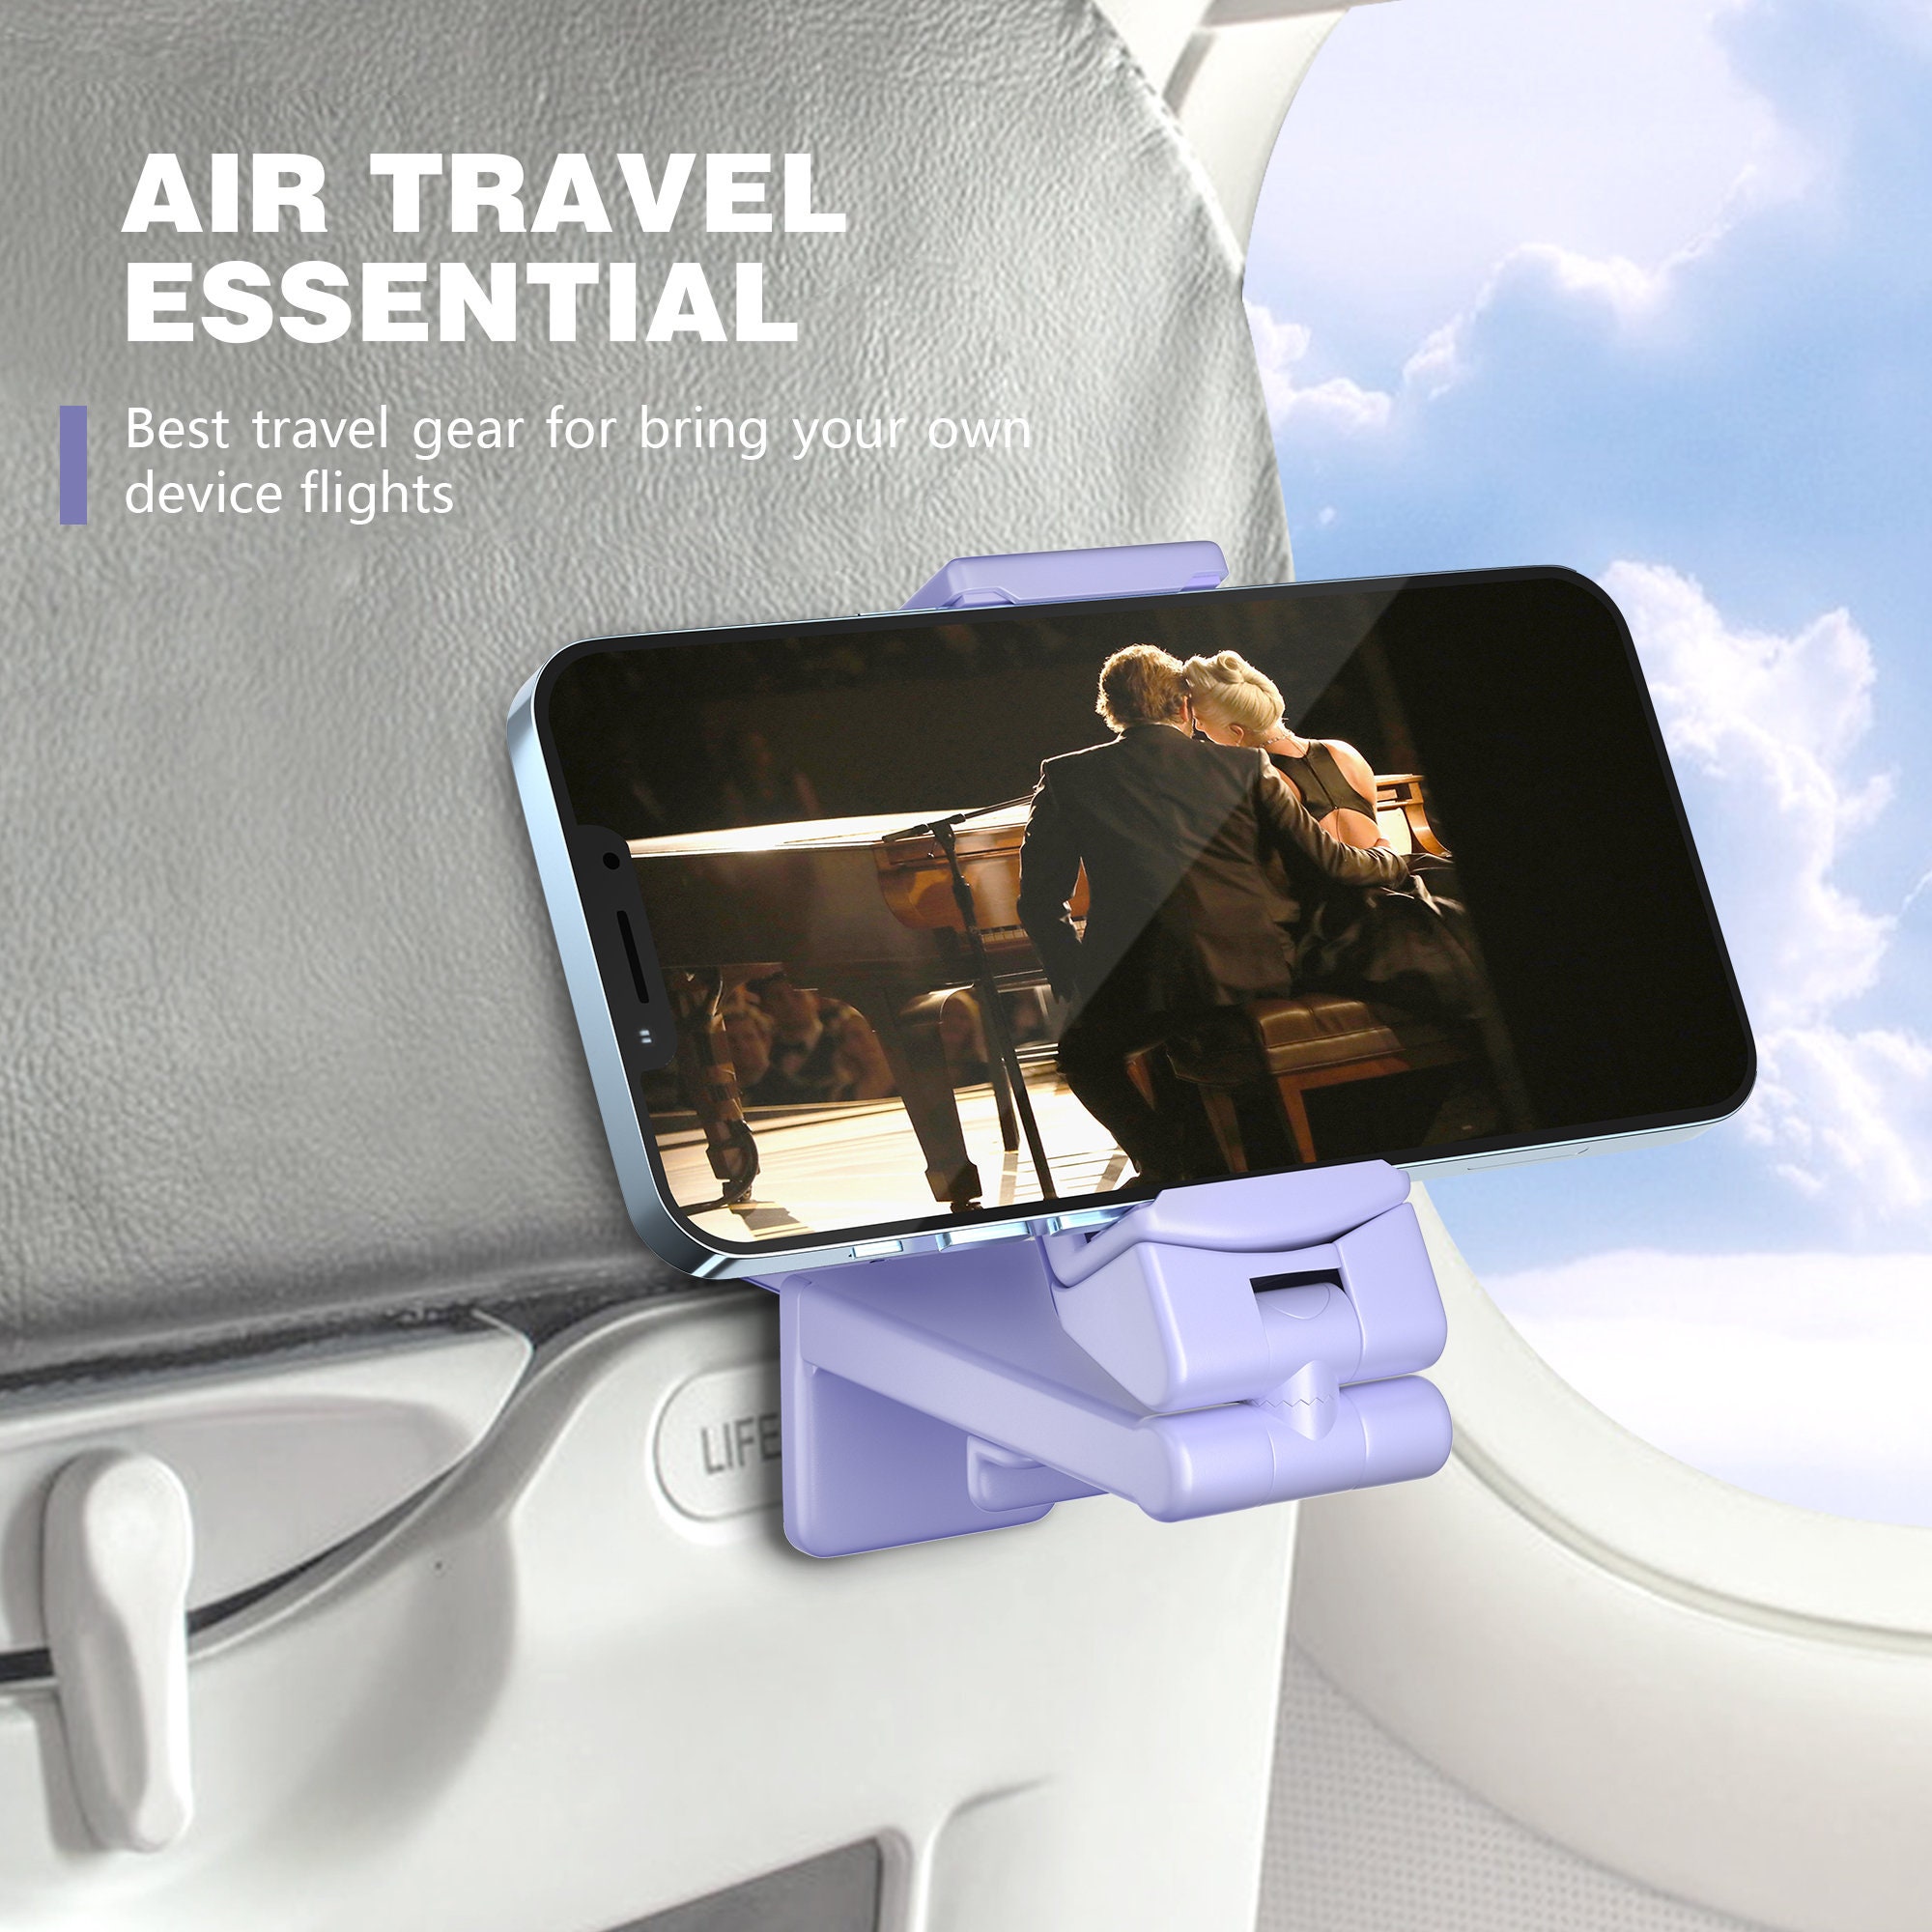 Travel Essential Airplane Phone Mount for Bring Your Own Device Flights.  Practical Gift for Friends, Families and Yourself. 